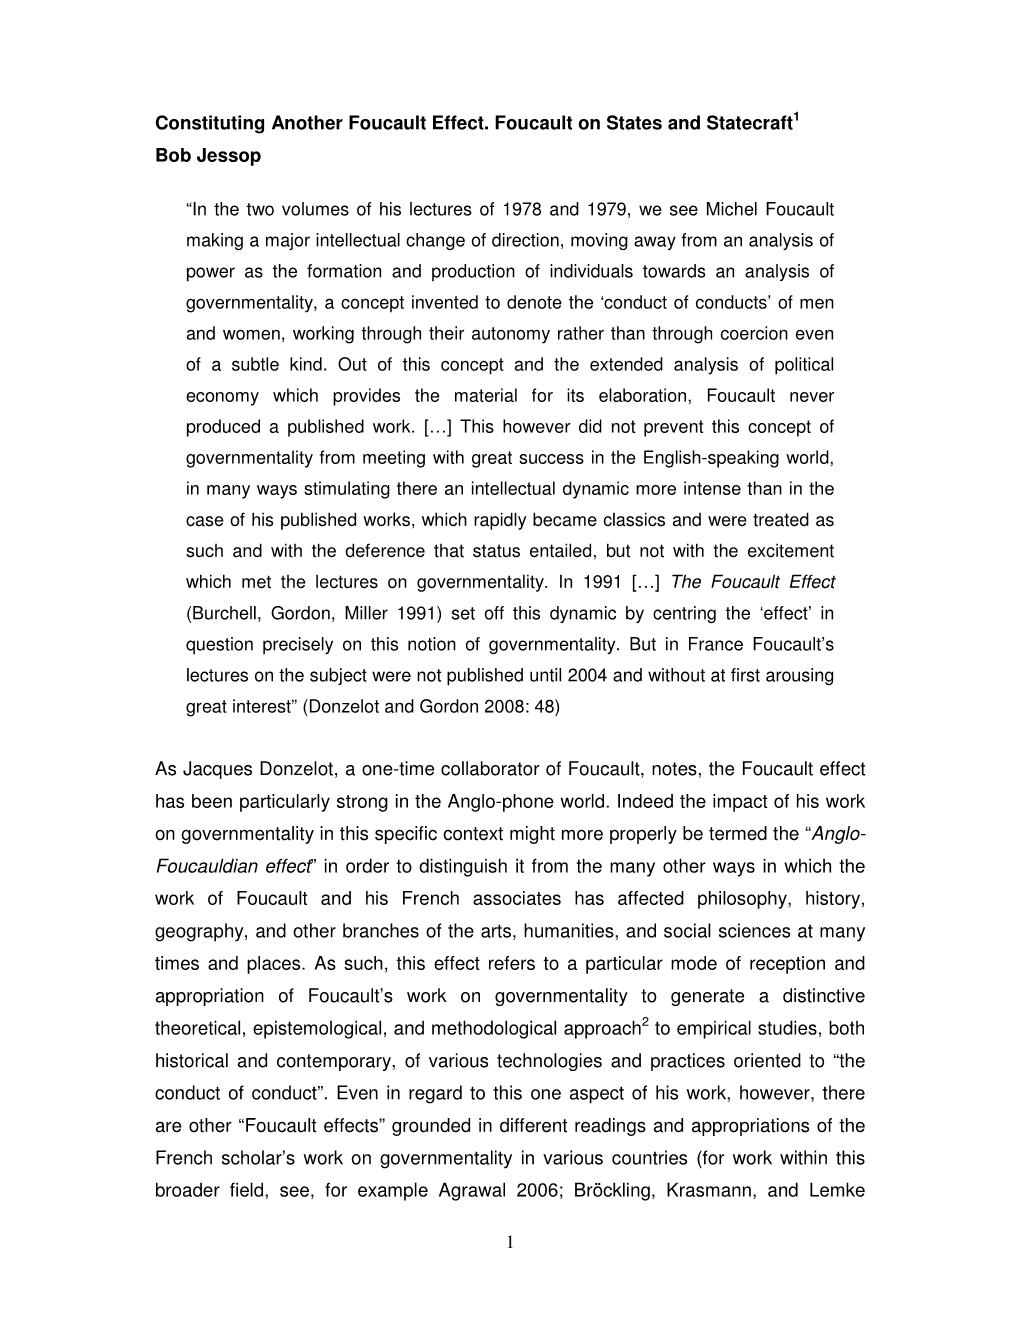 Constituting Another Foucault Effect. Foucault on States and Statecraft1